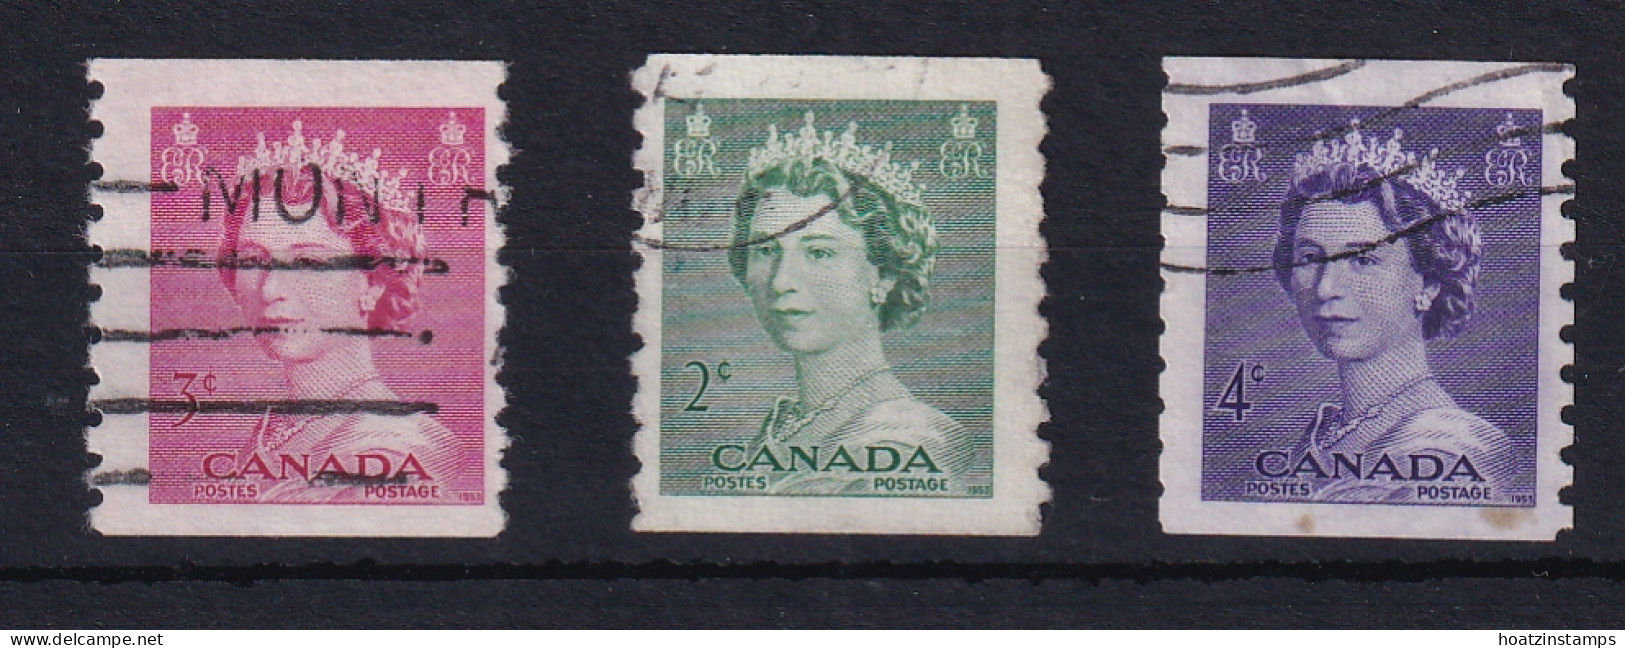 Canada: 1953   QE II - Coil Stamps Set   SG455-457  [Imperf X 9½]   Used - Usati